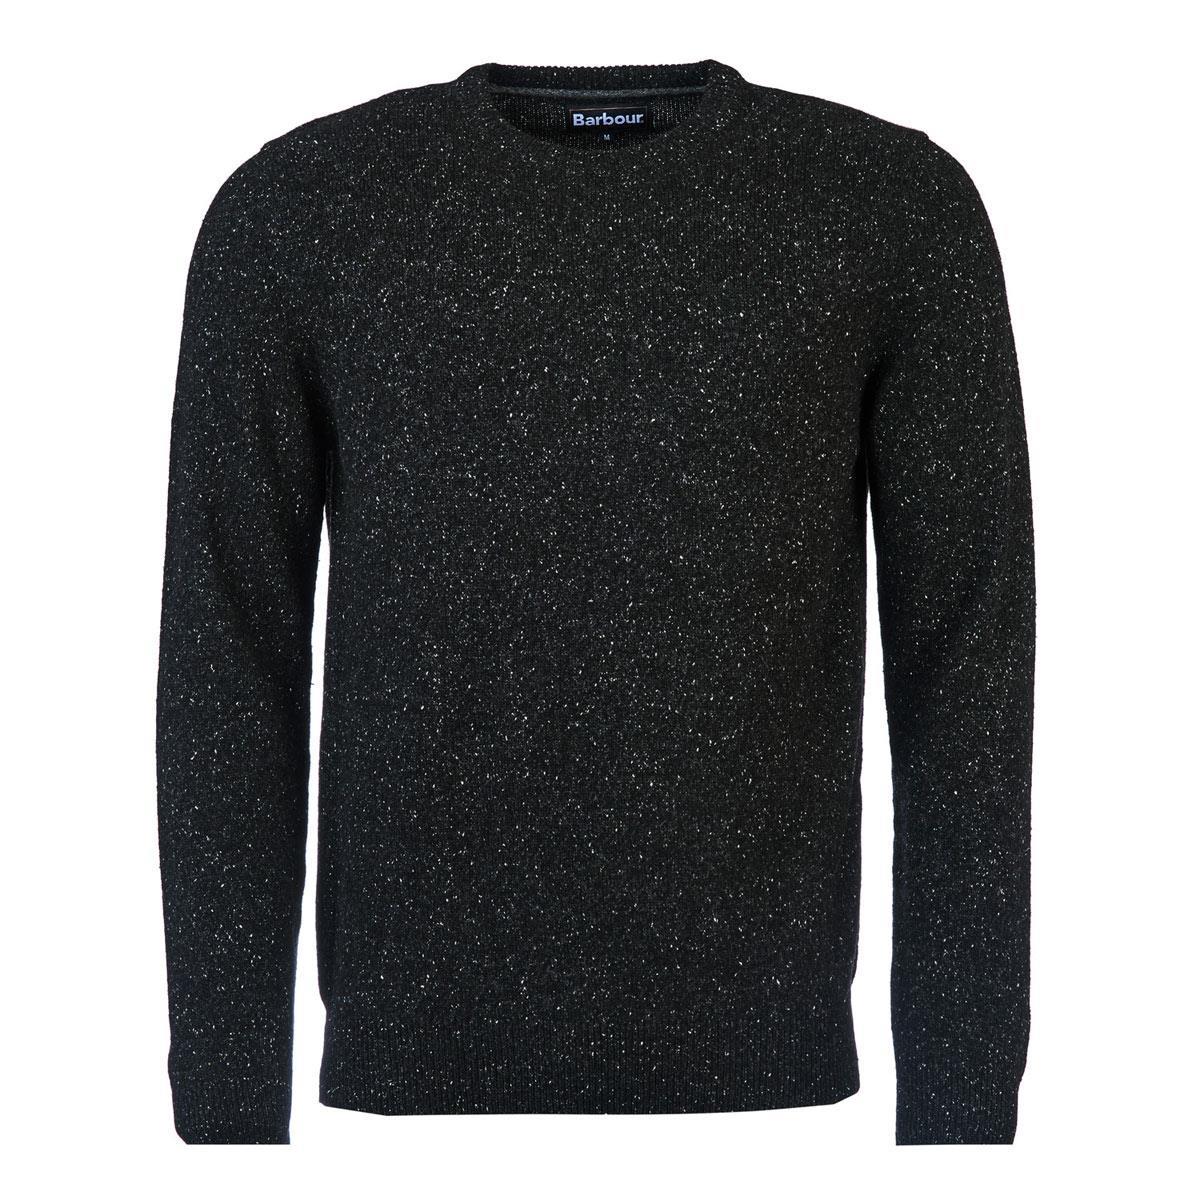 What is the Barbour Tisbury Crew Neck Sweater?